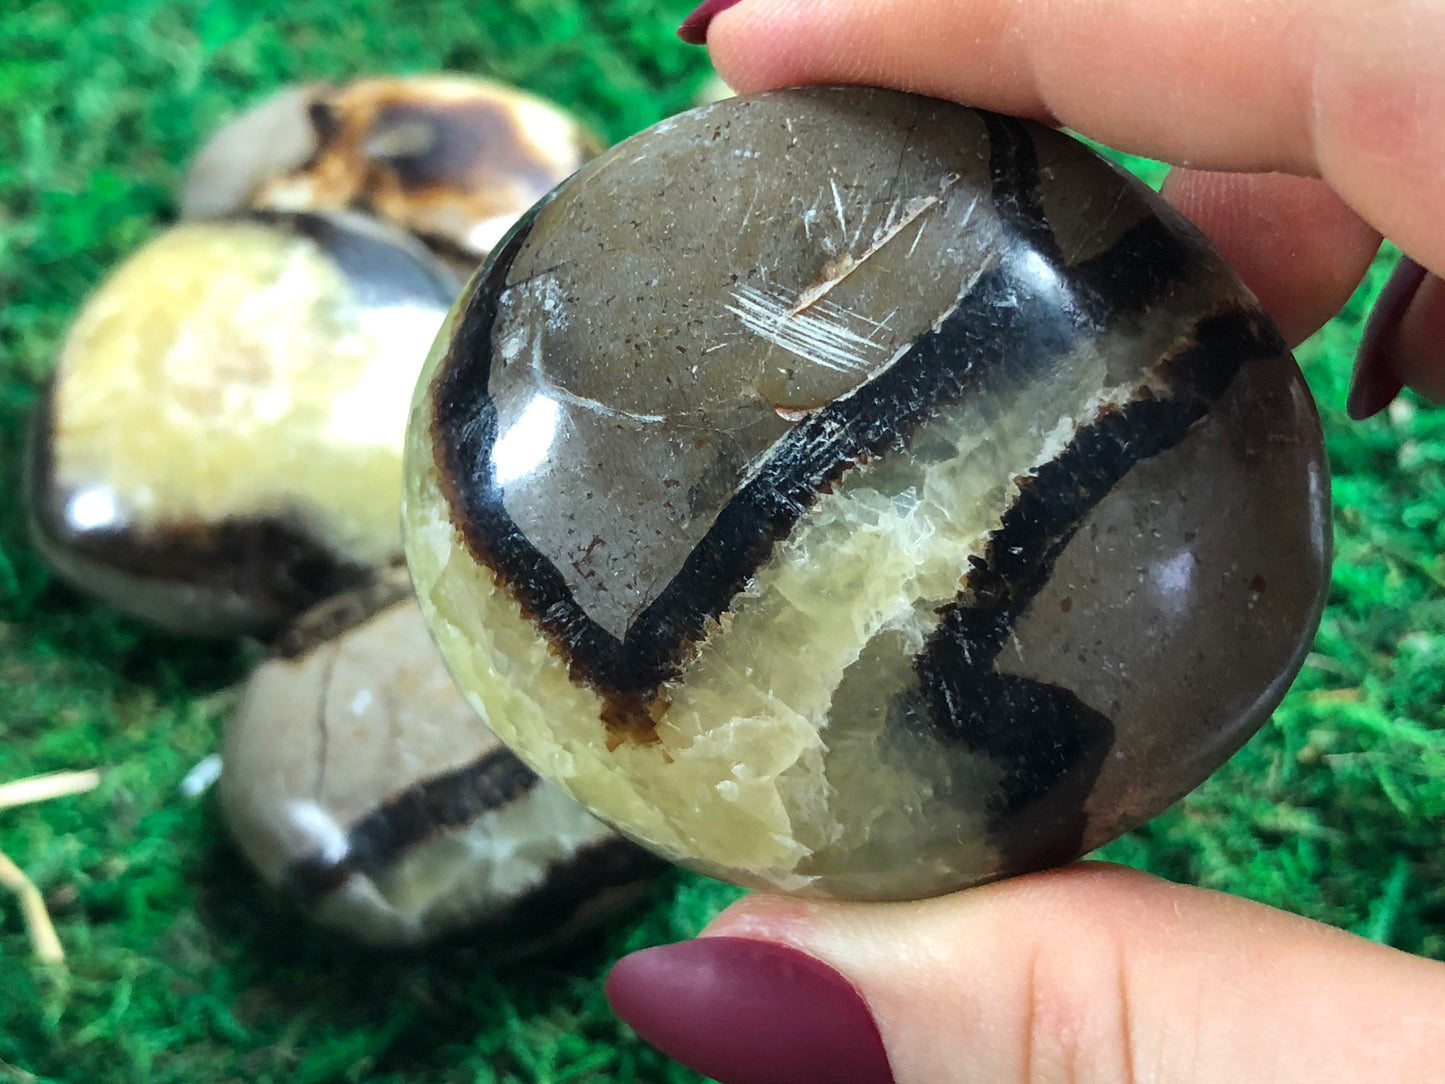 Pictured are various polished septarian (dragon stone) stones.